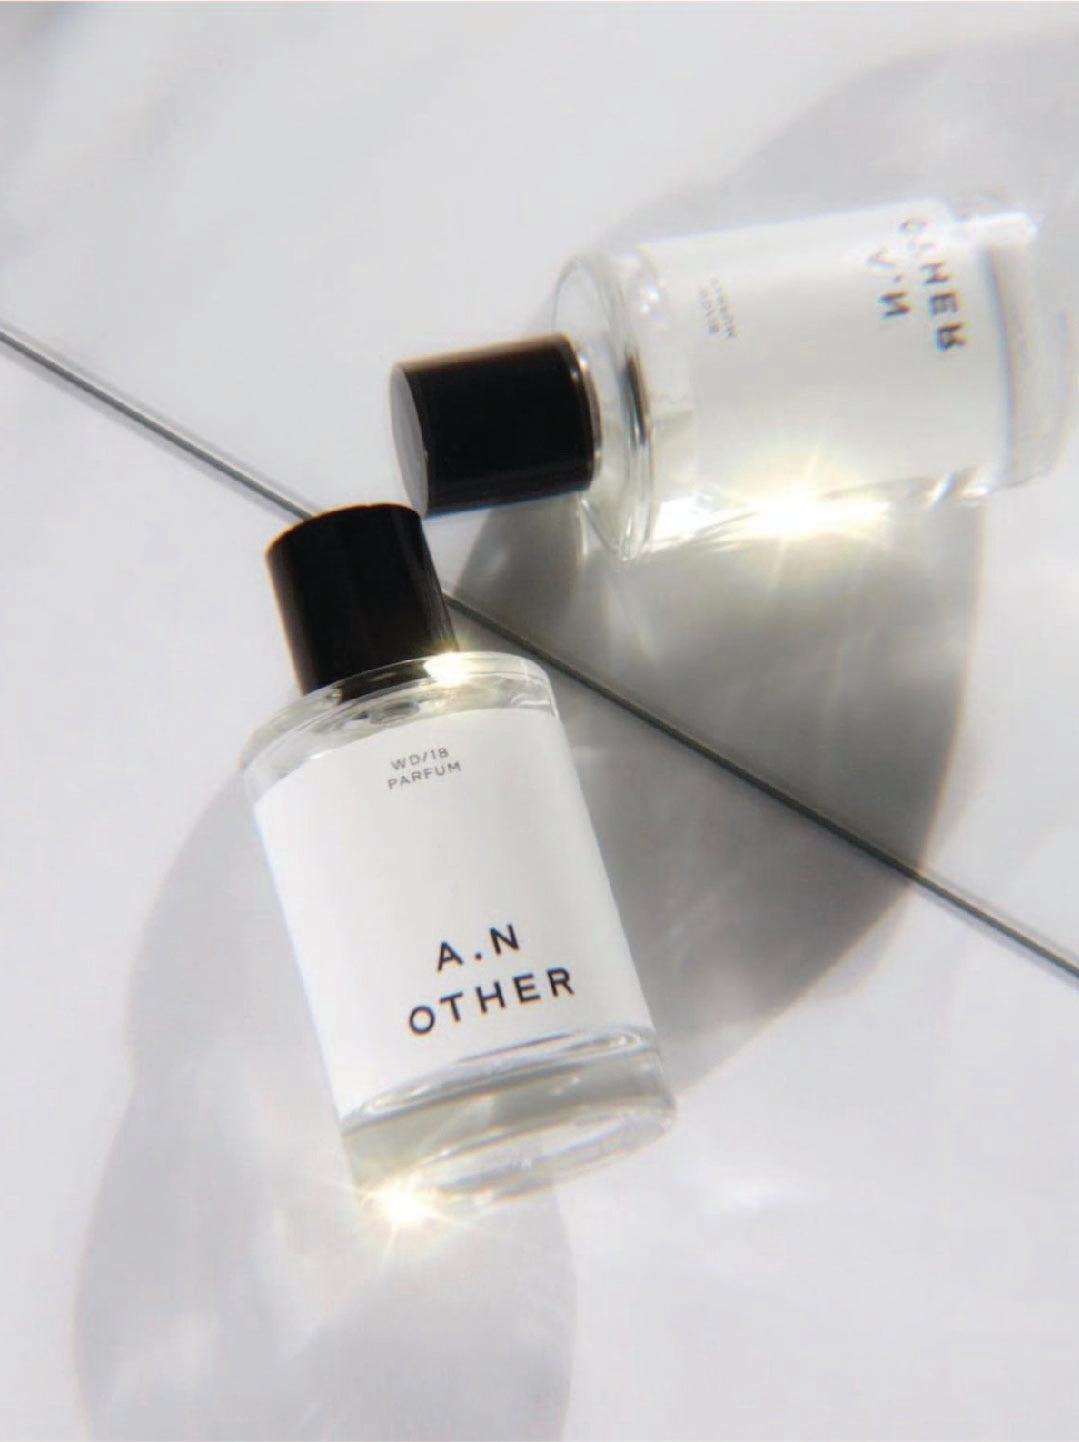 A. N Other Perfume - OR / 2018